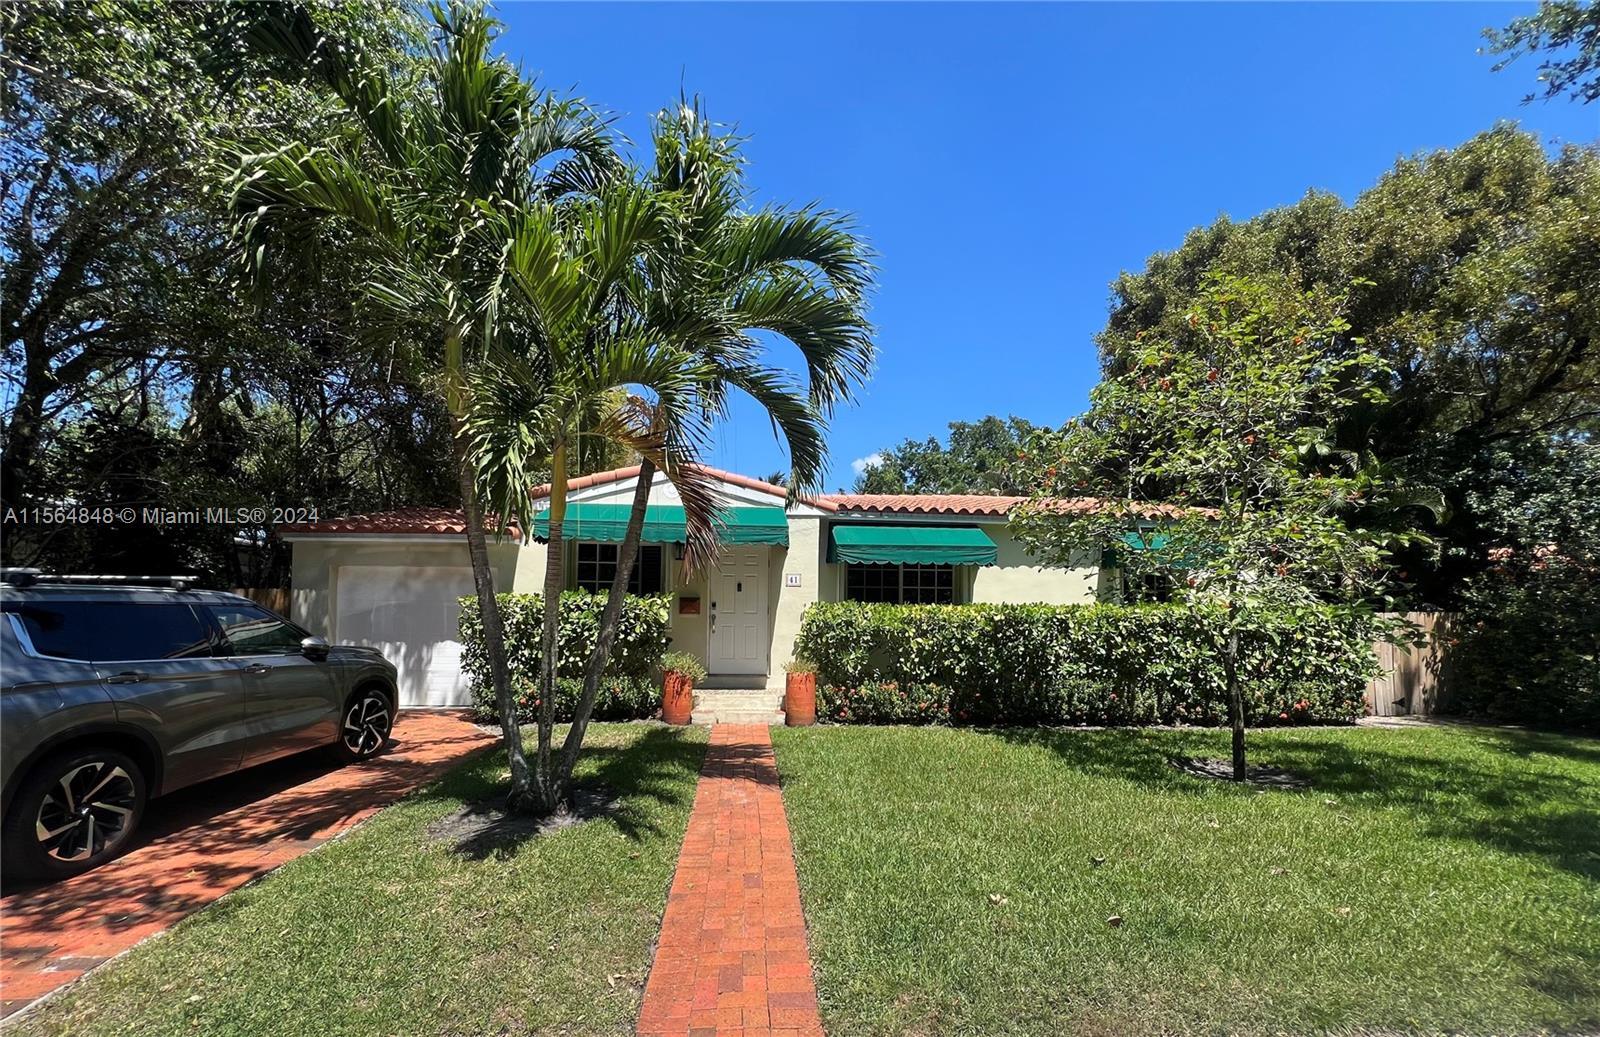 This beautiful single-family home in Miami Shores boasts 3 bedrooms and 1 bath with an array of feat